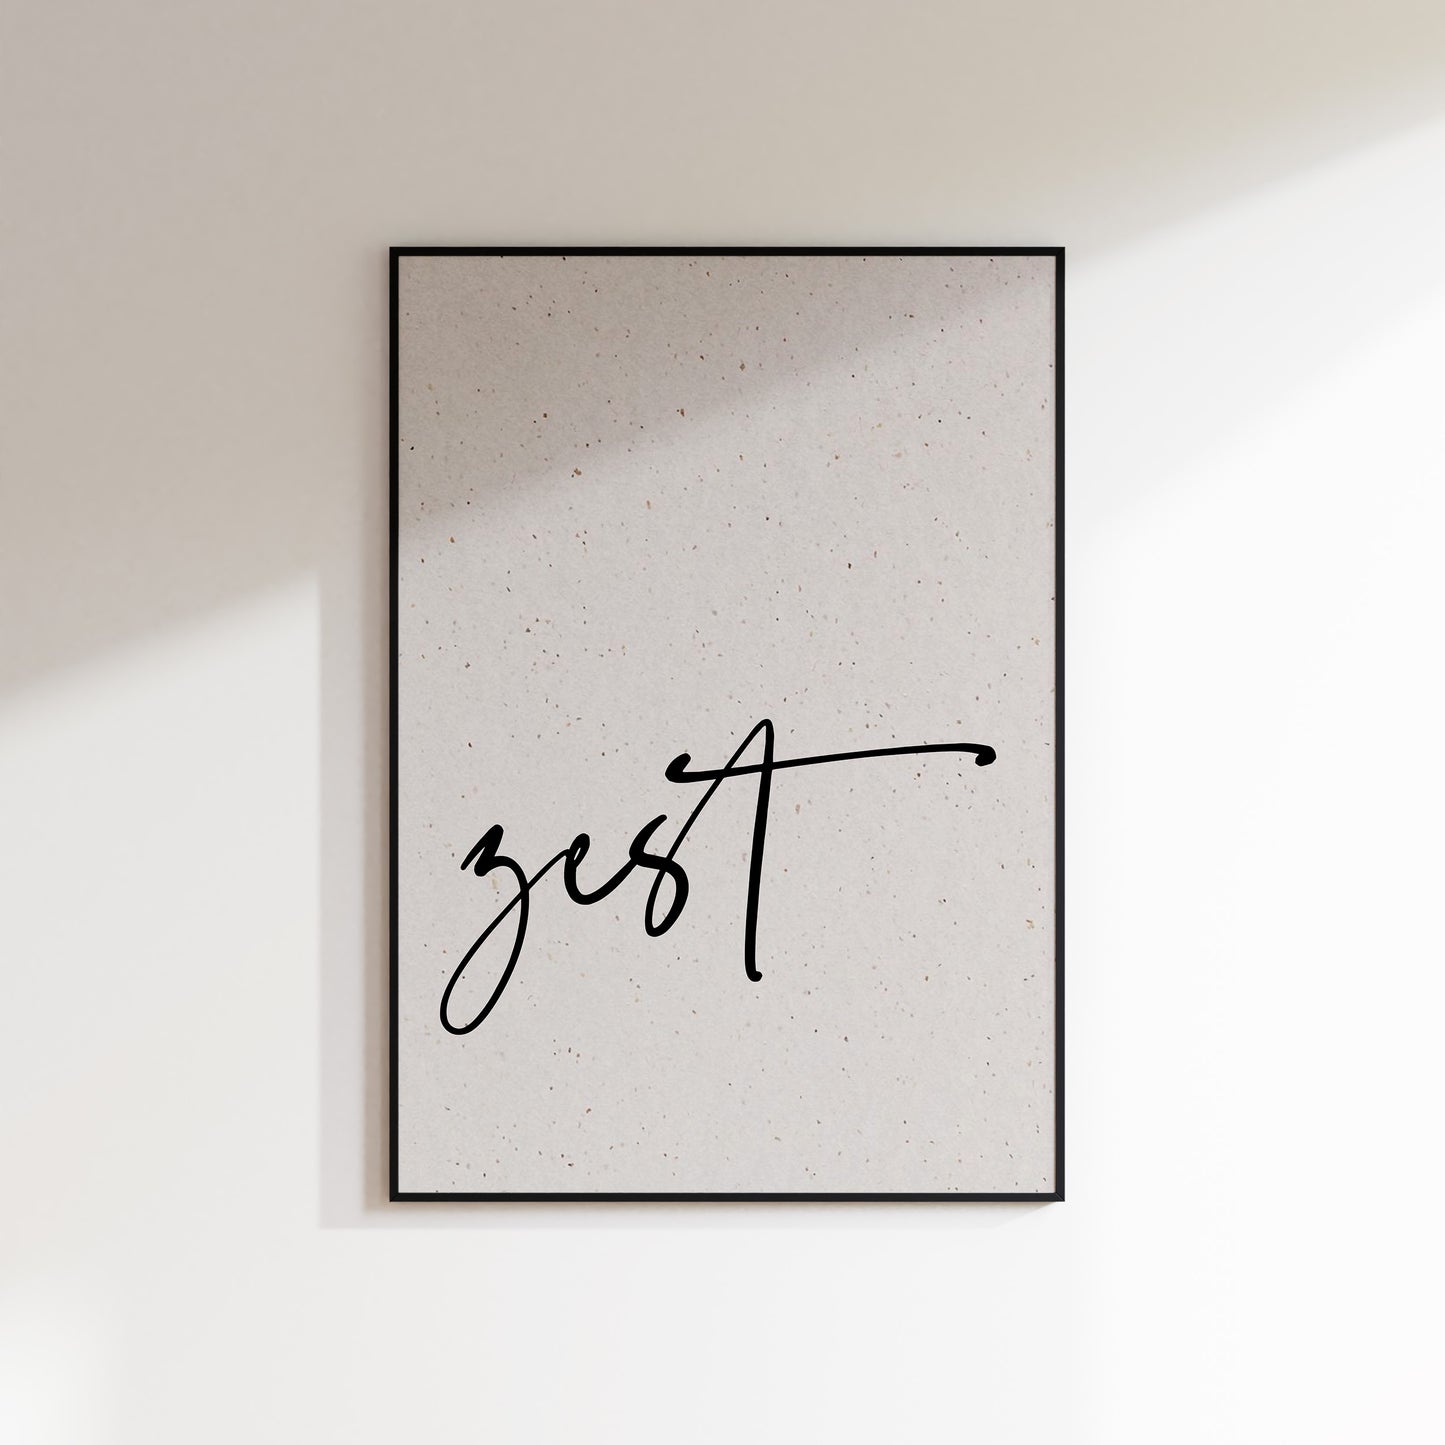 A print on textured paper with black text that reads 'zest' in a handwriting style typeface. A culinary print for the kitchen. Print is in a black frame on a white wall background.